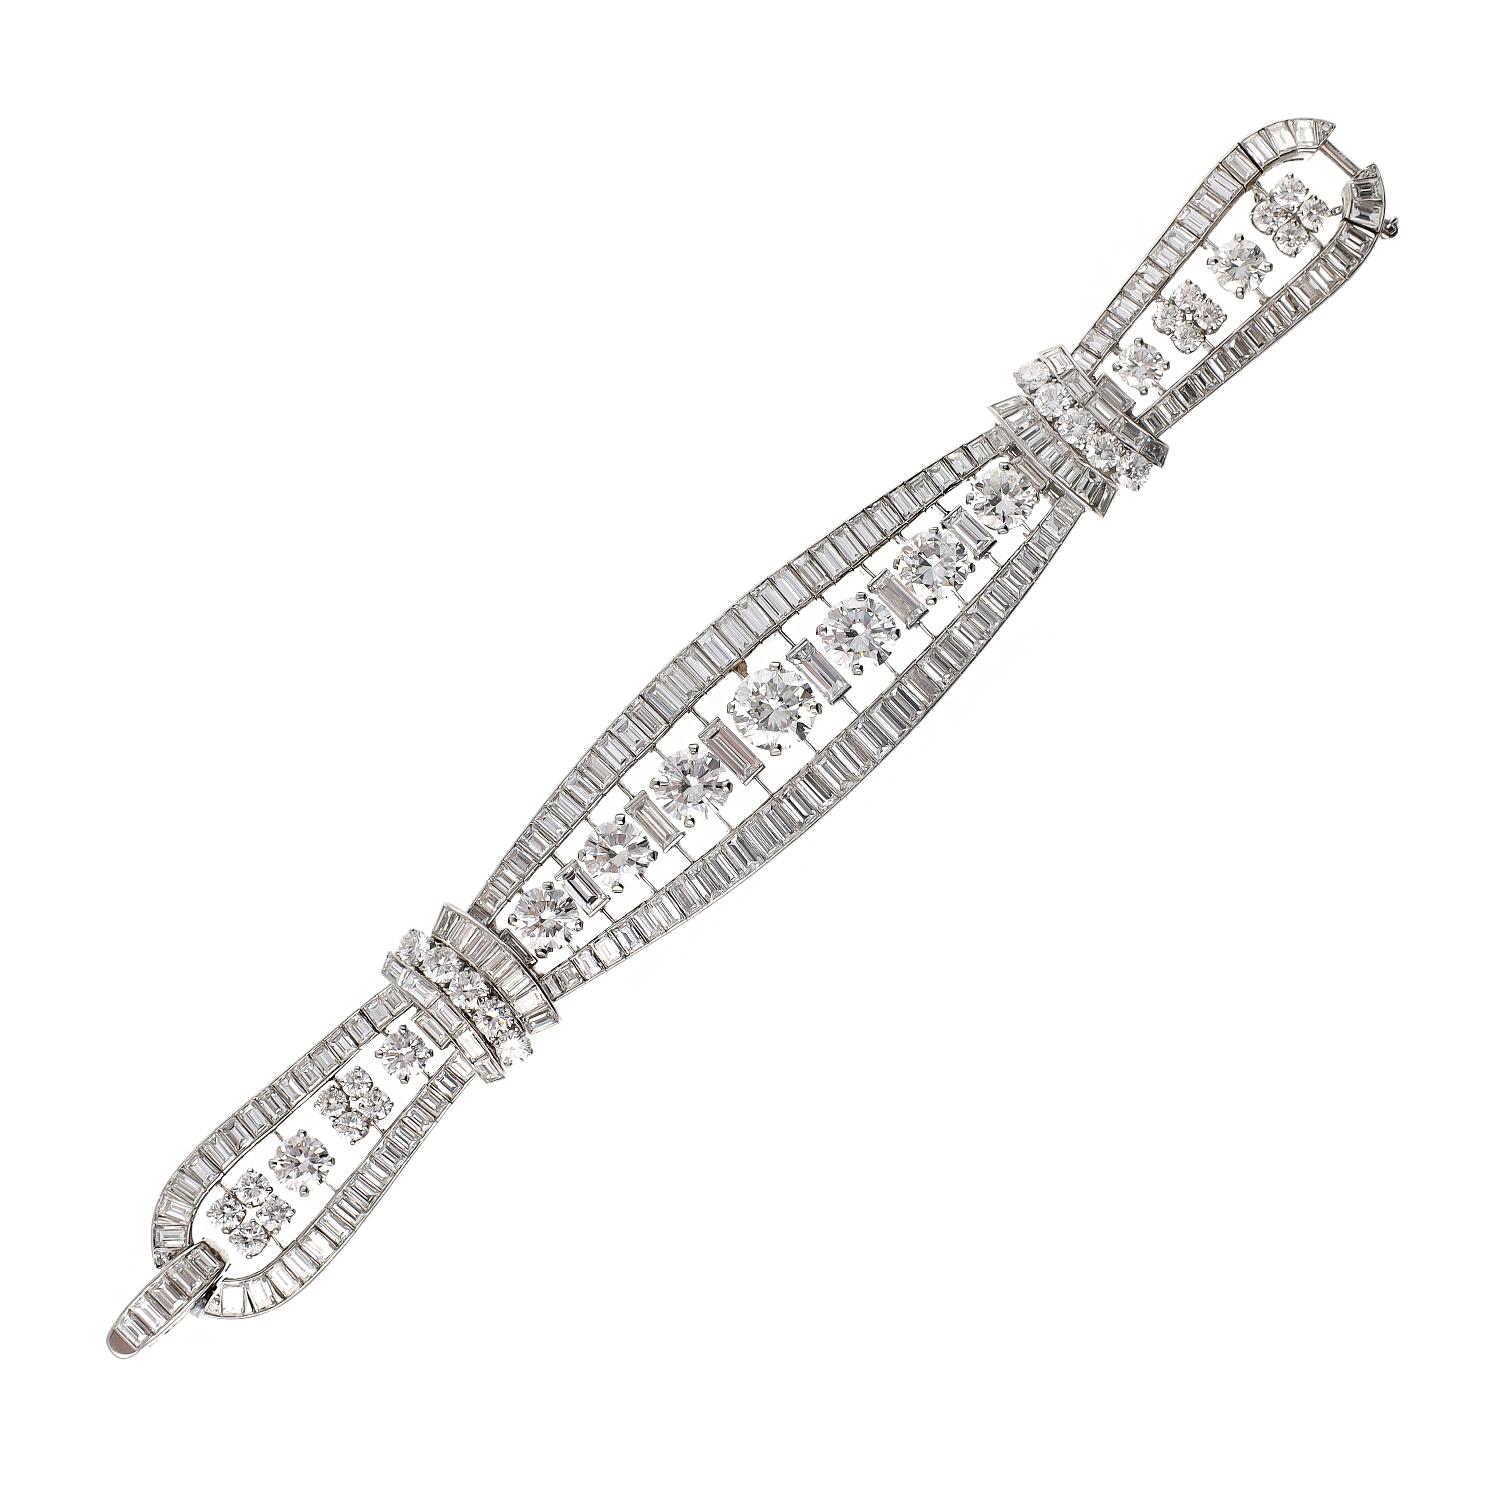 AN CLEEf & ARPELS Round & Baguette Diamond Bracelet
A flexible band set with round brilliant-cut and baguette diamonds, mounted in platinum, signed Van Cleef & Arpels.
Total length is approx. 7″ by 0.50-1.0″ wide
Total diamond carat weight approx.